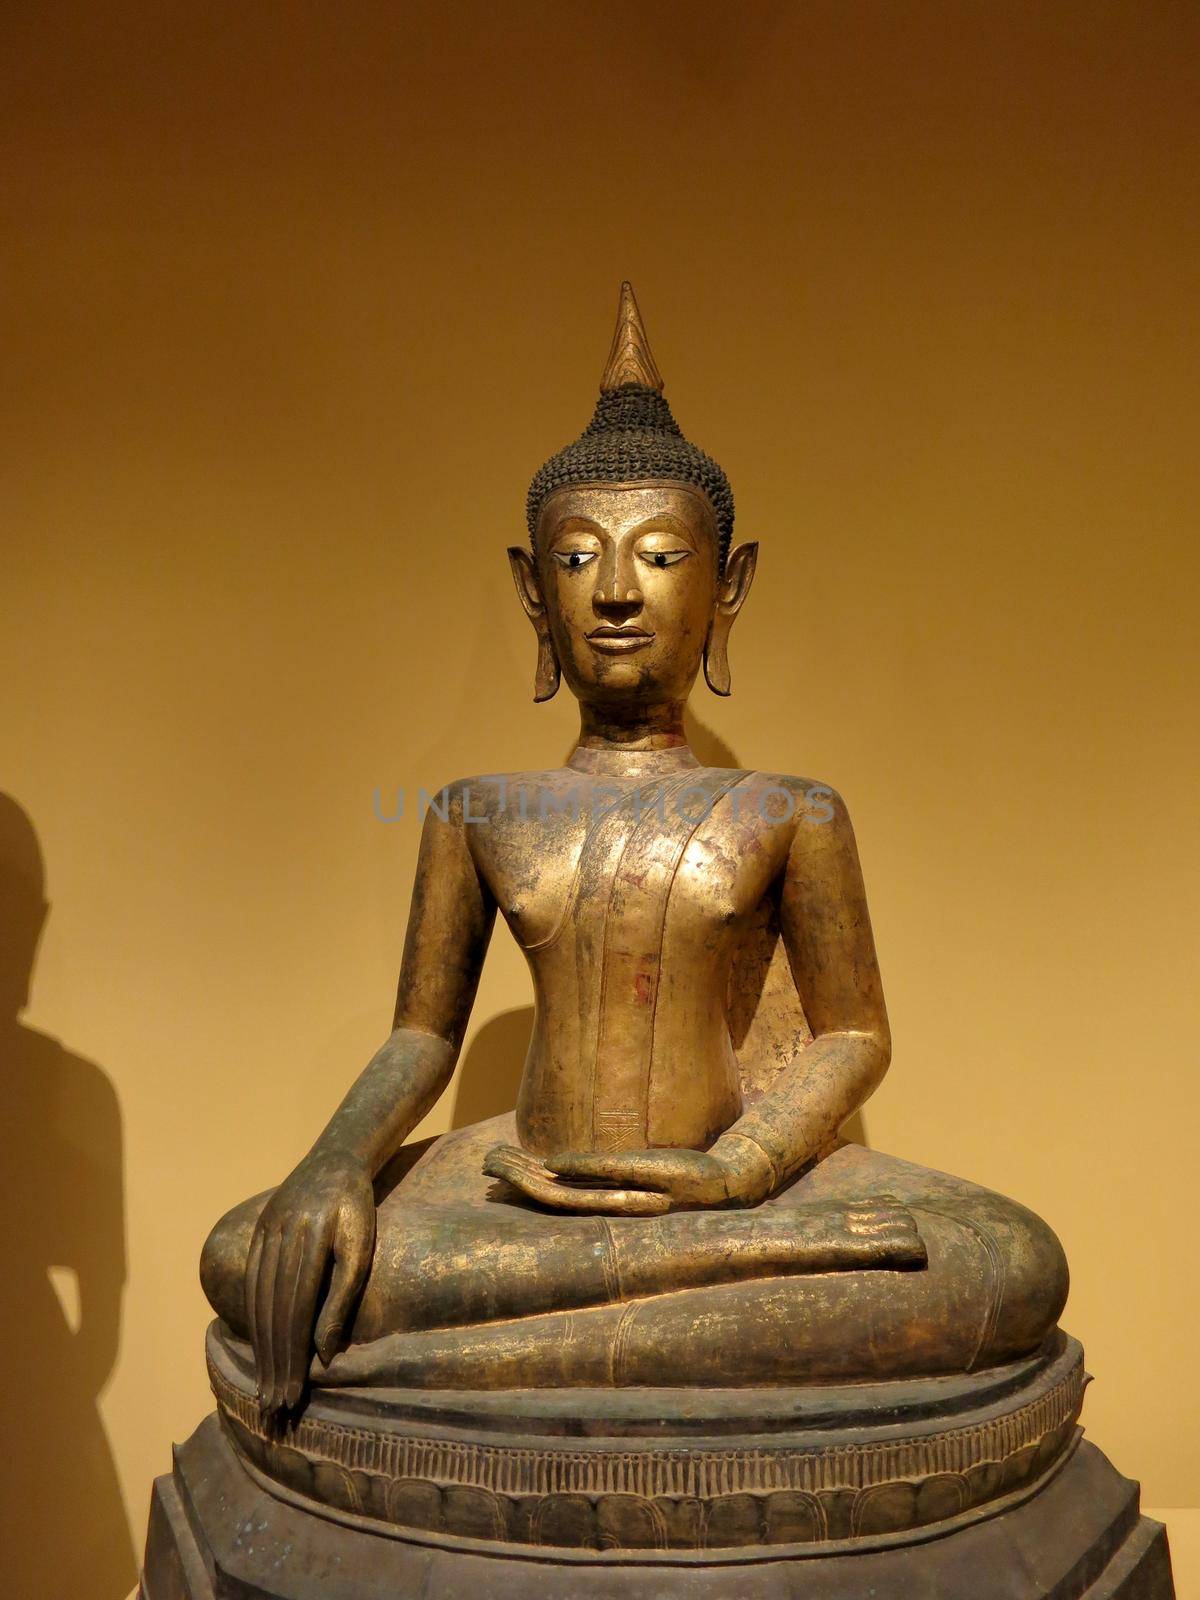 HonoluIu - May 9, 2015: Seated Buddha, 16th century, Artist is Anonymous, Medium Gilt bronze, inlaid shell and black lacquer, Geography: Thailand.  Displayed at Honolulu Museum of Art.